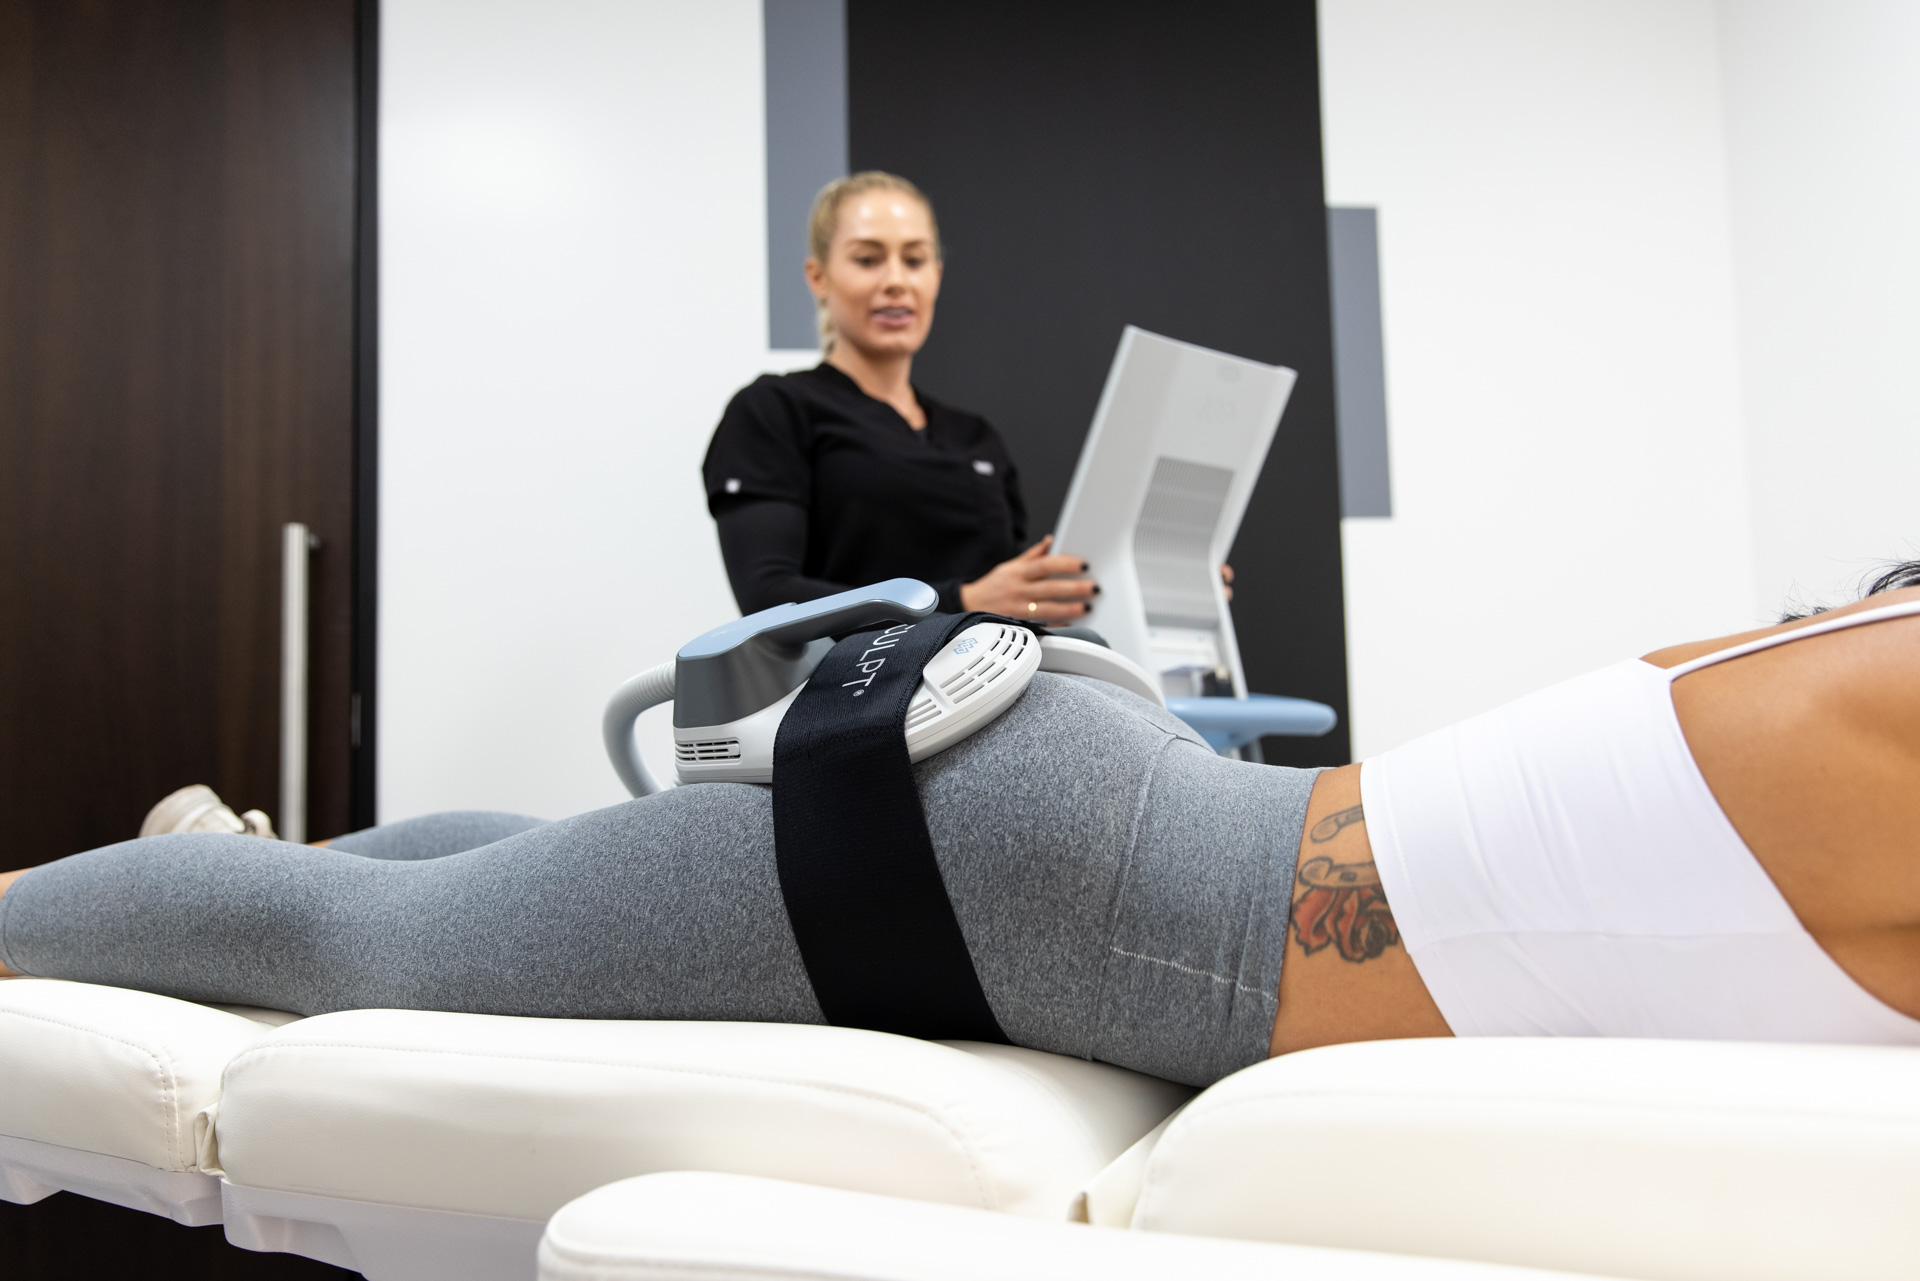 emsculpt treatment on the glutes, pre-vacation tips from entre nous